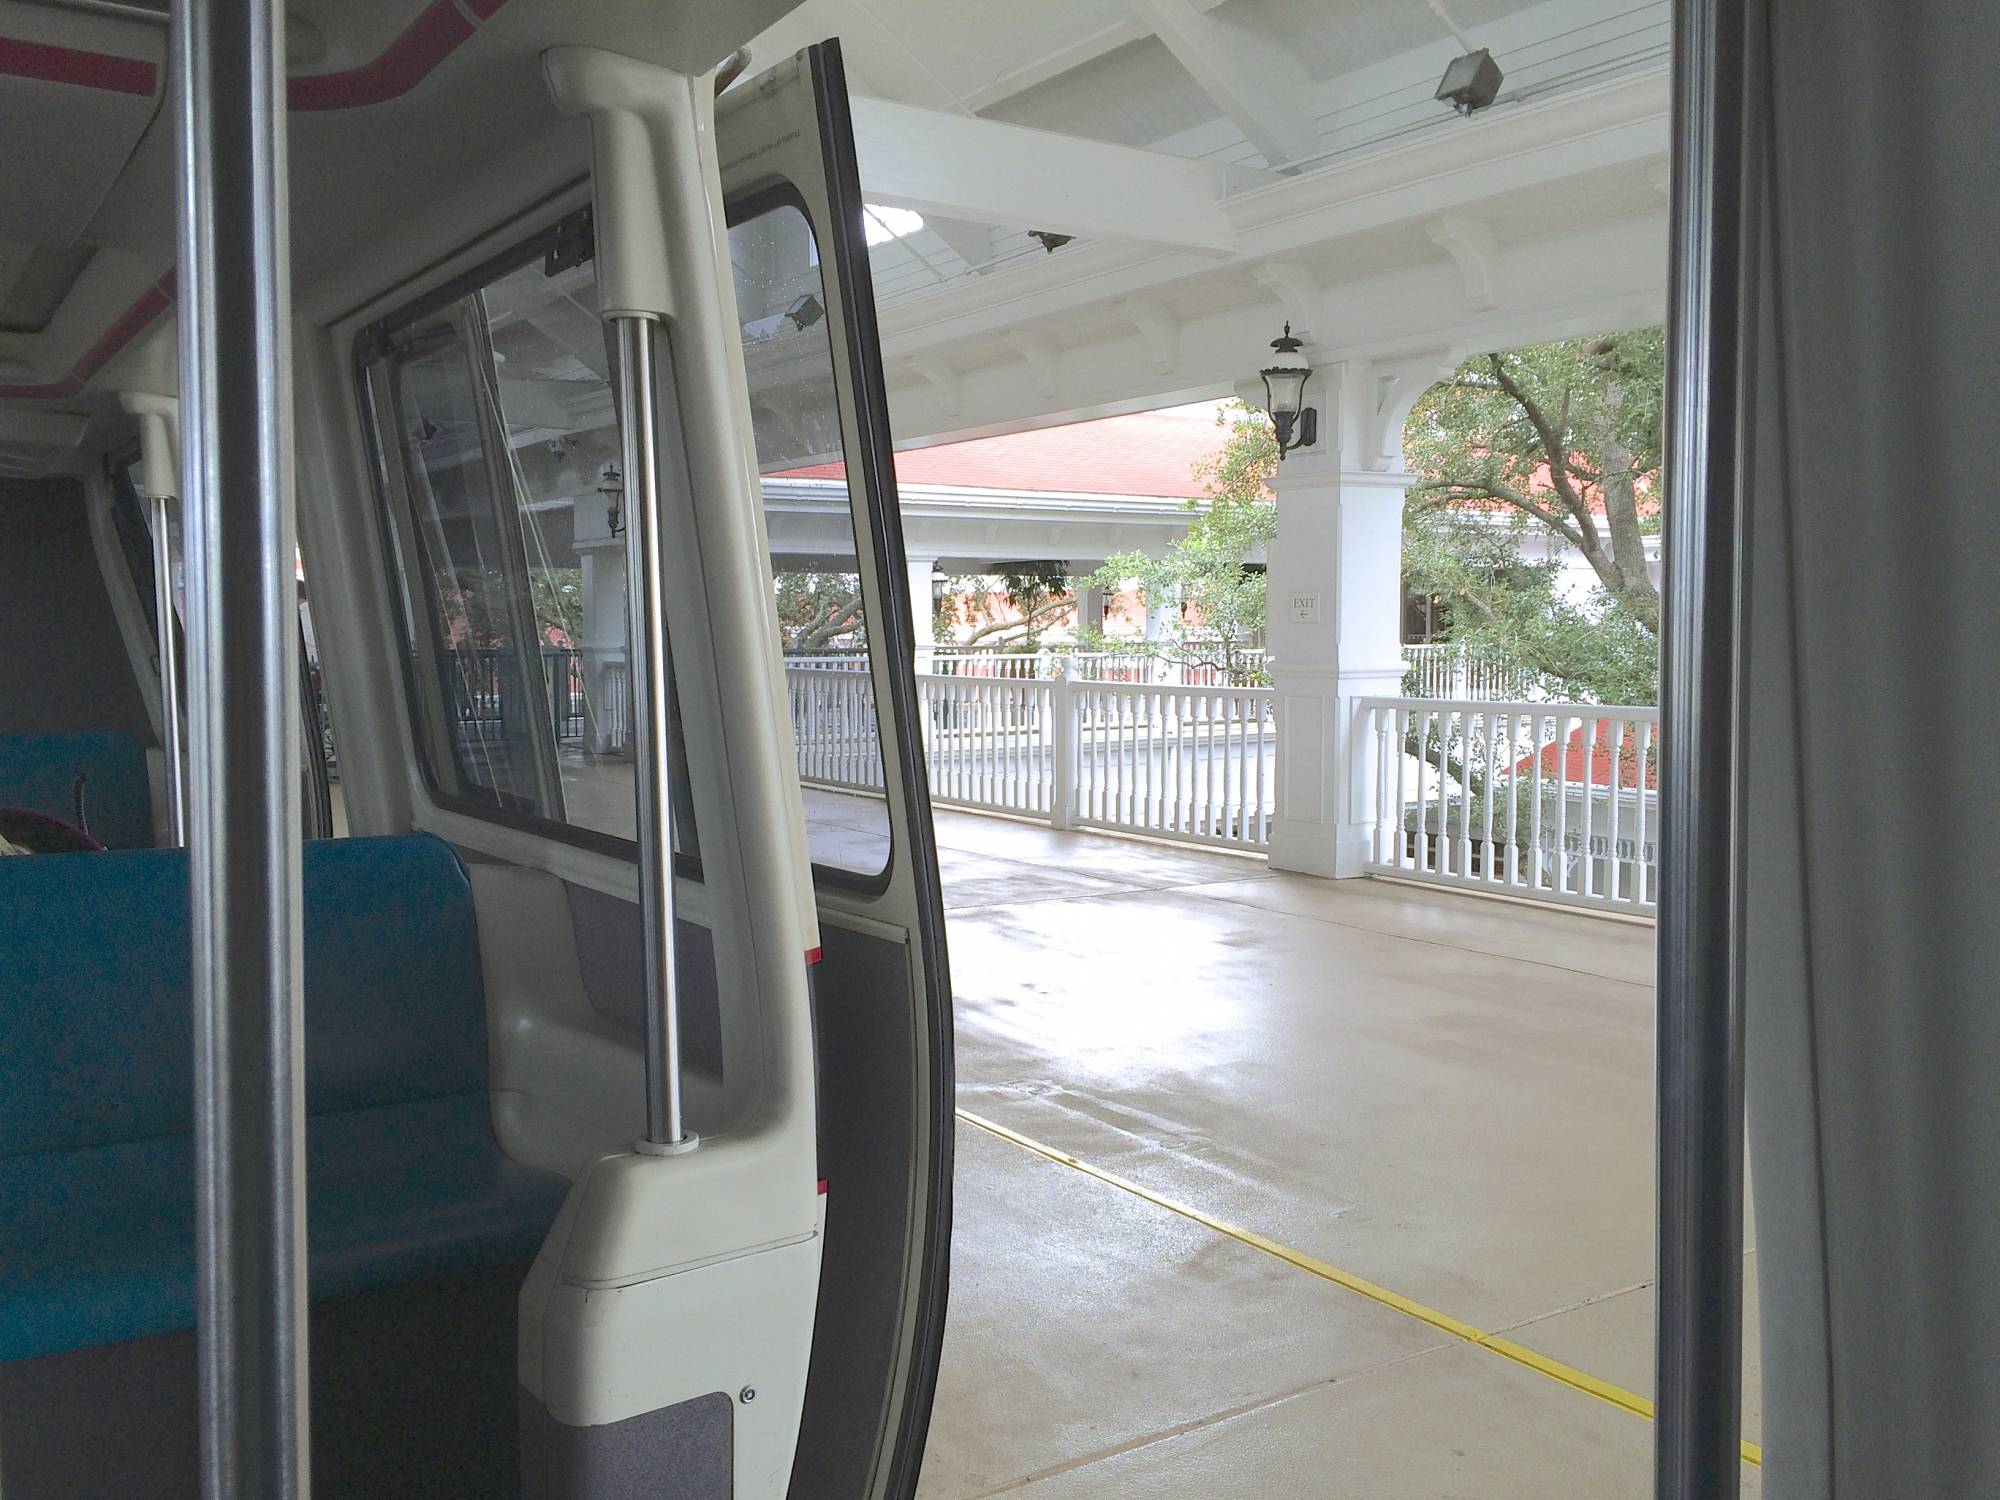 Monorail at The Grand Floridian